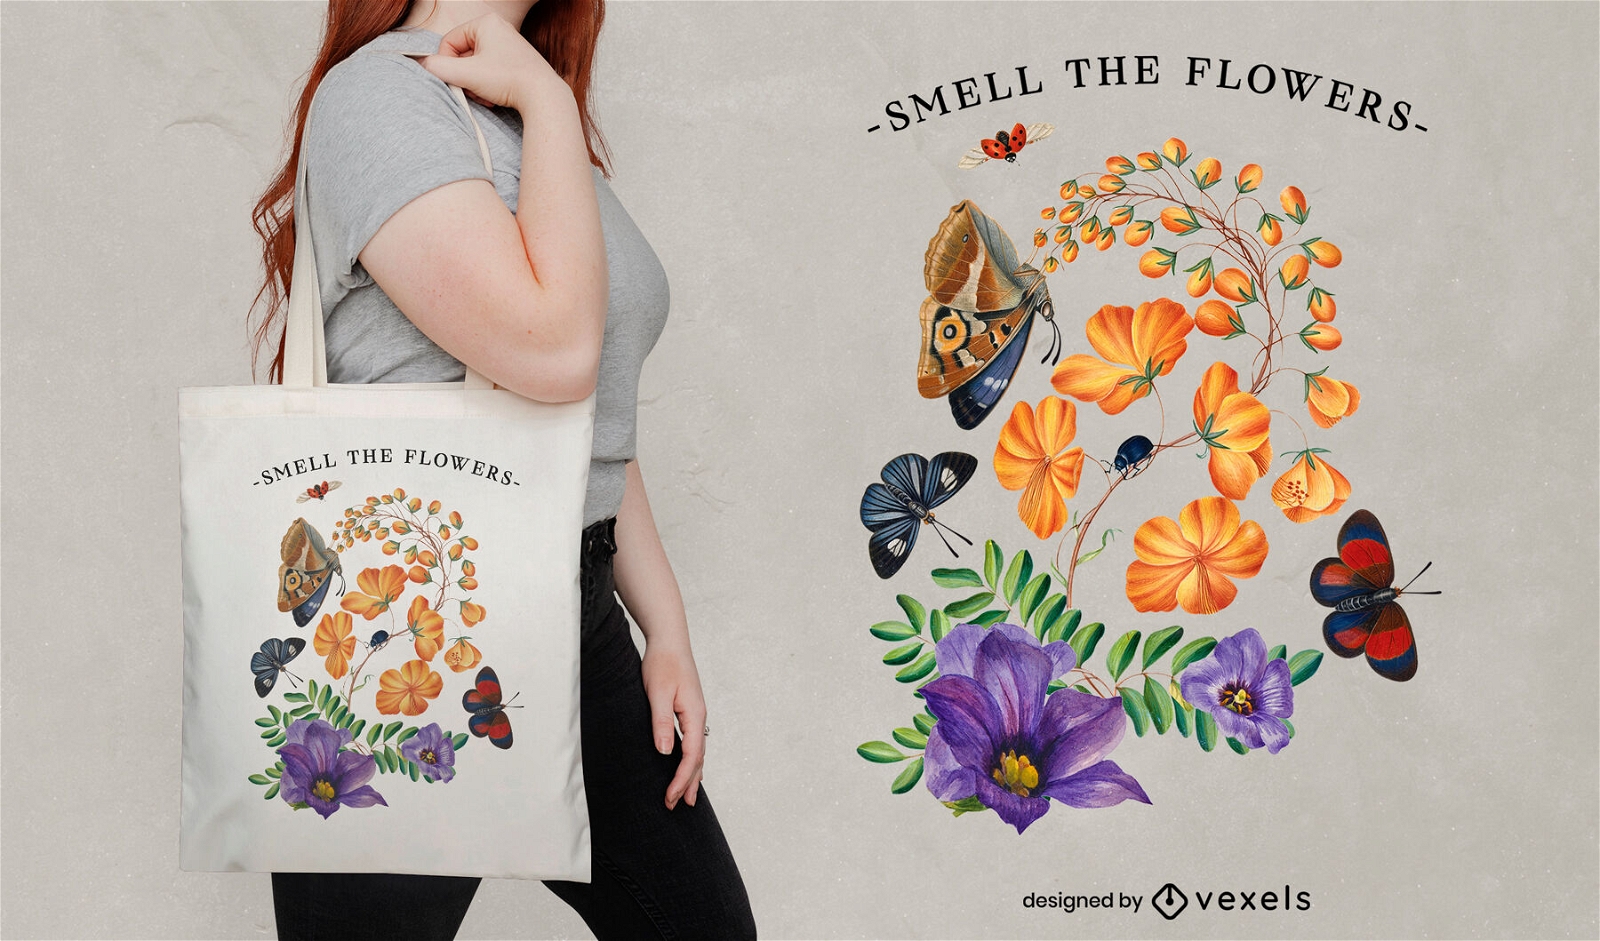 Smell the flowers tote bag design